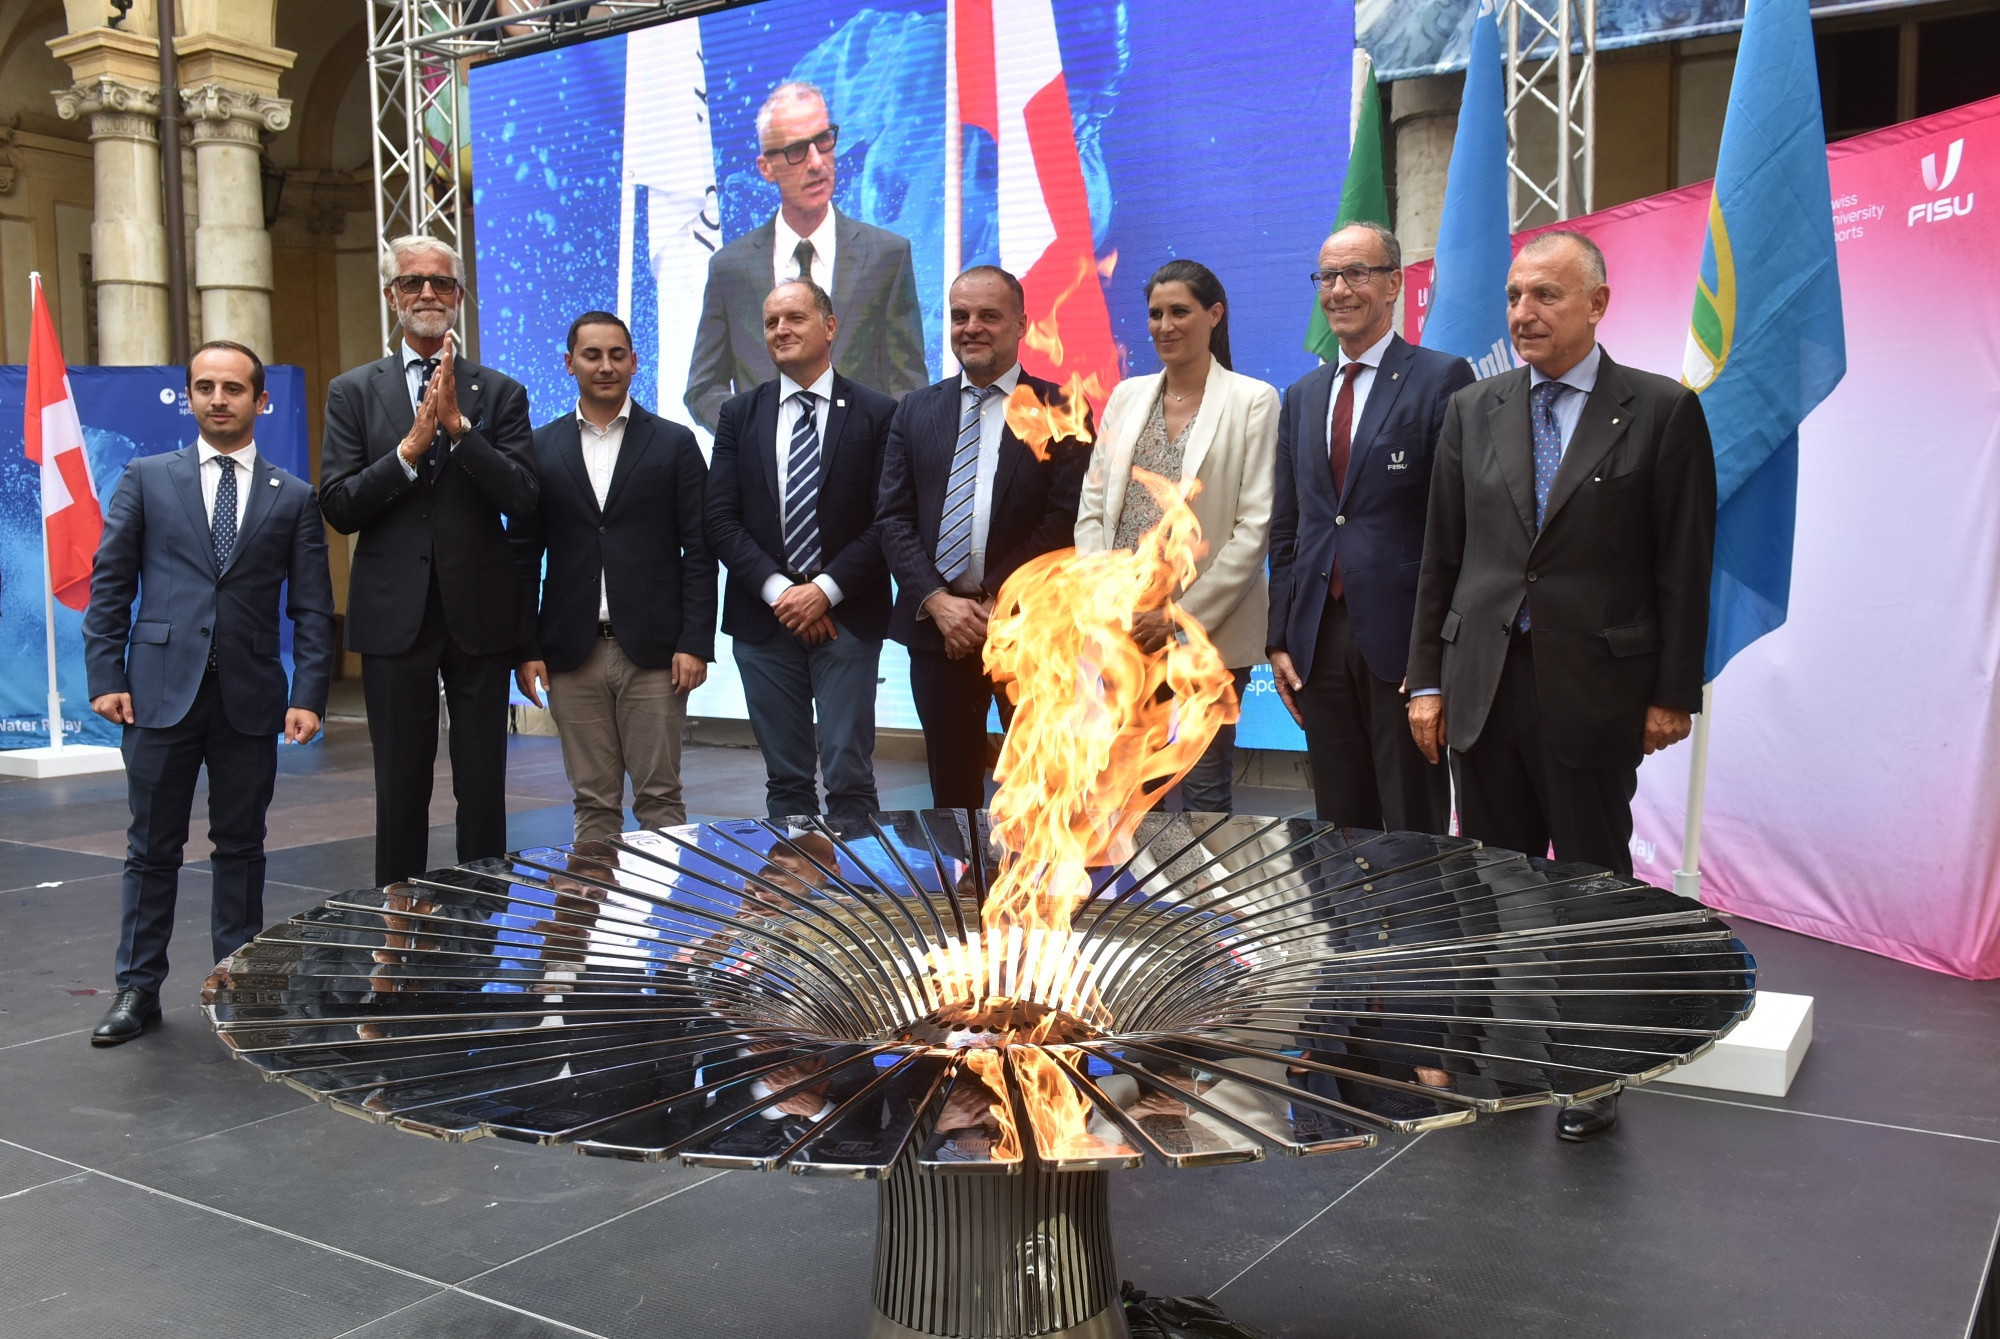 The 2021 International Day of University Sport included the beginning of the Flame Relay for the 2021 Winter Universiade in Lucerne ©FISU